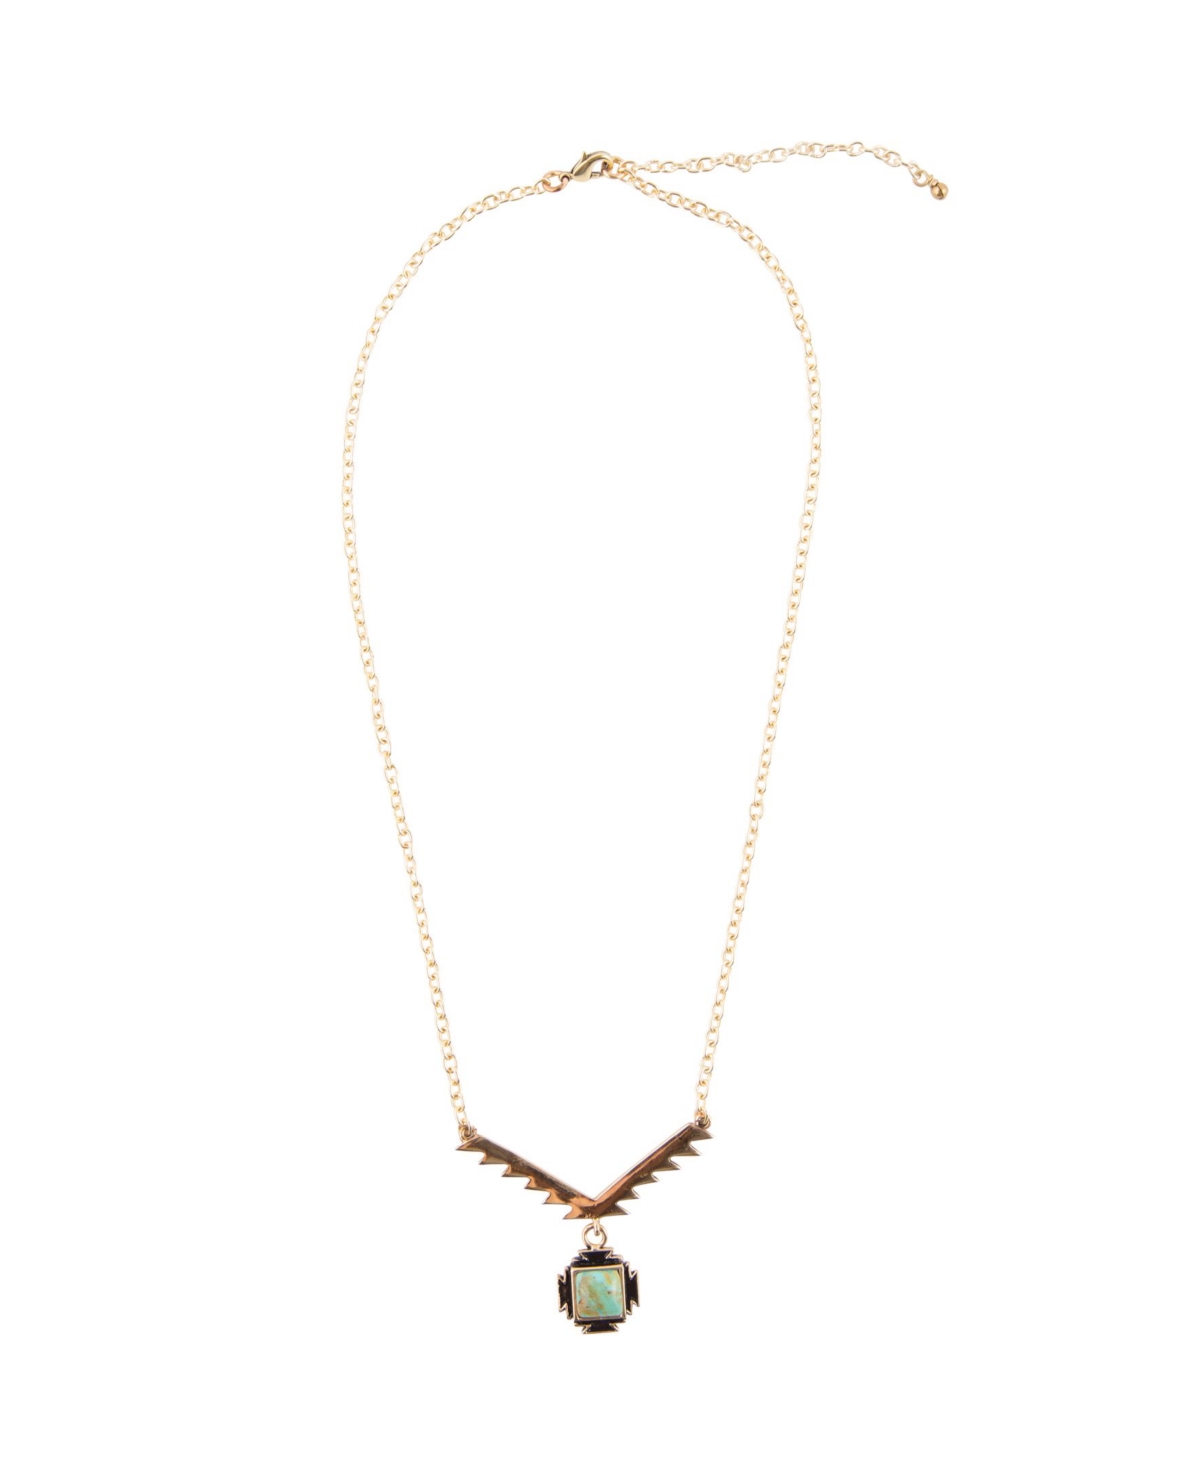 Barse Women's Aztec Bronze and Genuine Turquoise Necklace